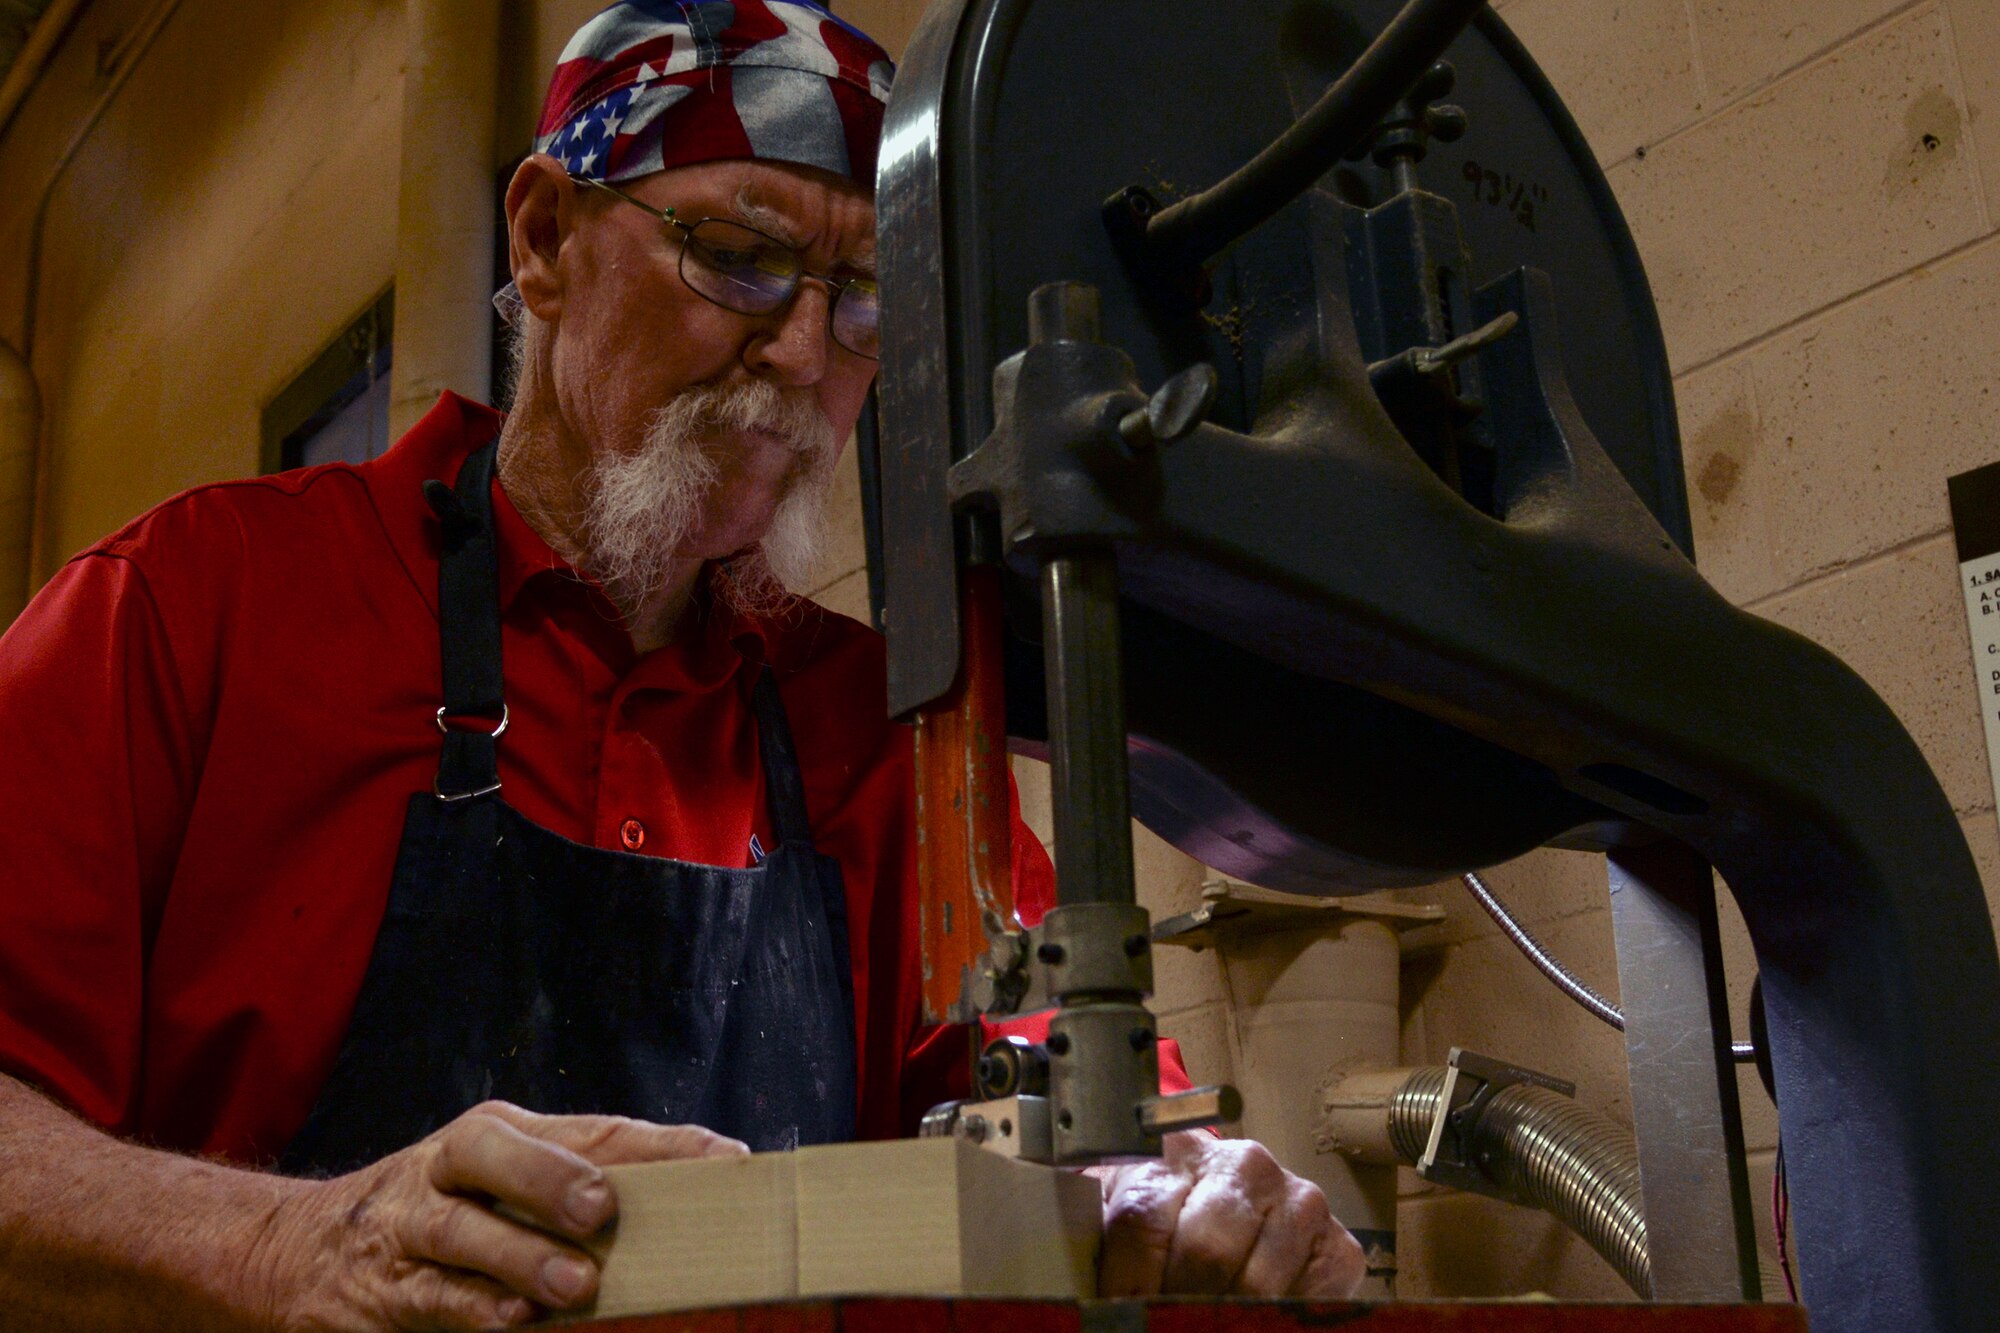 John Fischbach Sr., 23d Force Support Squadron recreation aide, saws a piece of wood, Jan. 15, 2016, at Moody Air Force Base, Ga. Fischbach has worked at Moody’s woodshop for more than 10 years. (U.S. Air Force photo by Airman 1st Class Janiqua P. Robinson/Released)